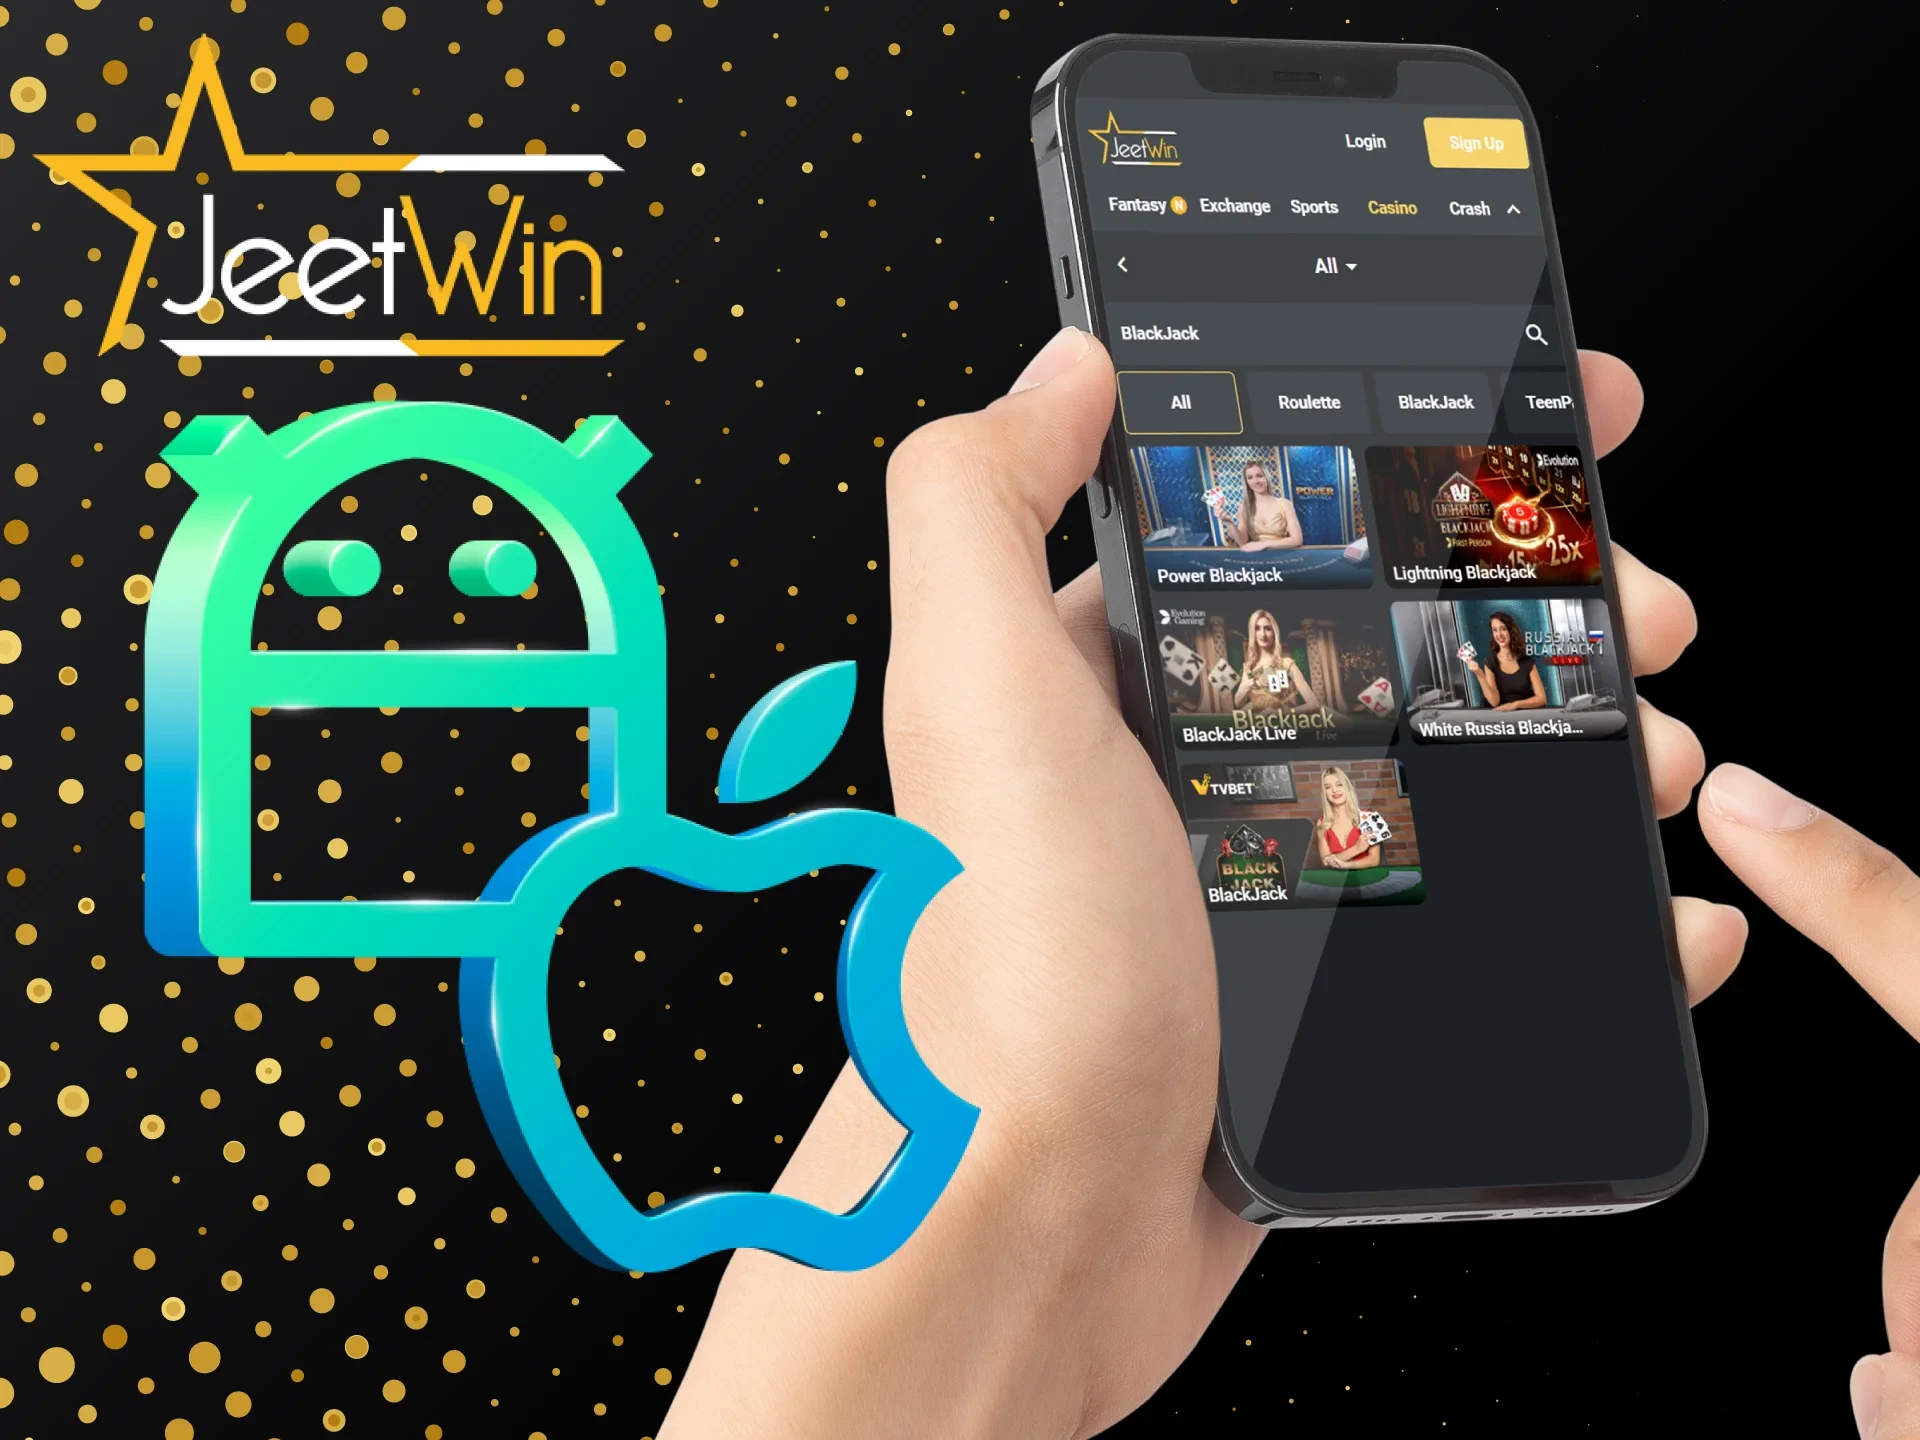 Install the JeetWin app and bet on blackjack.